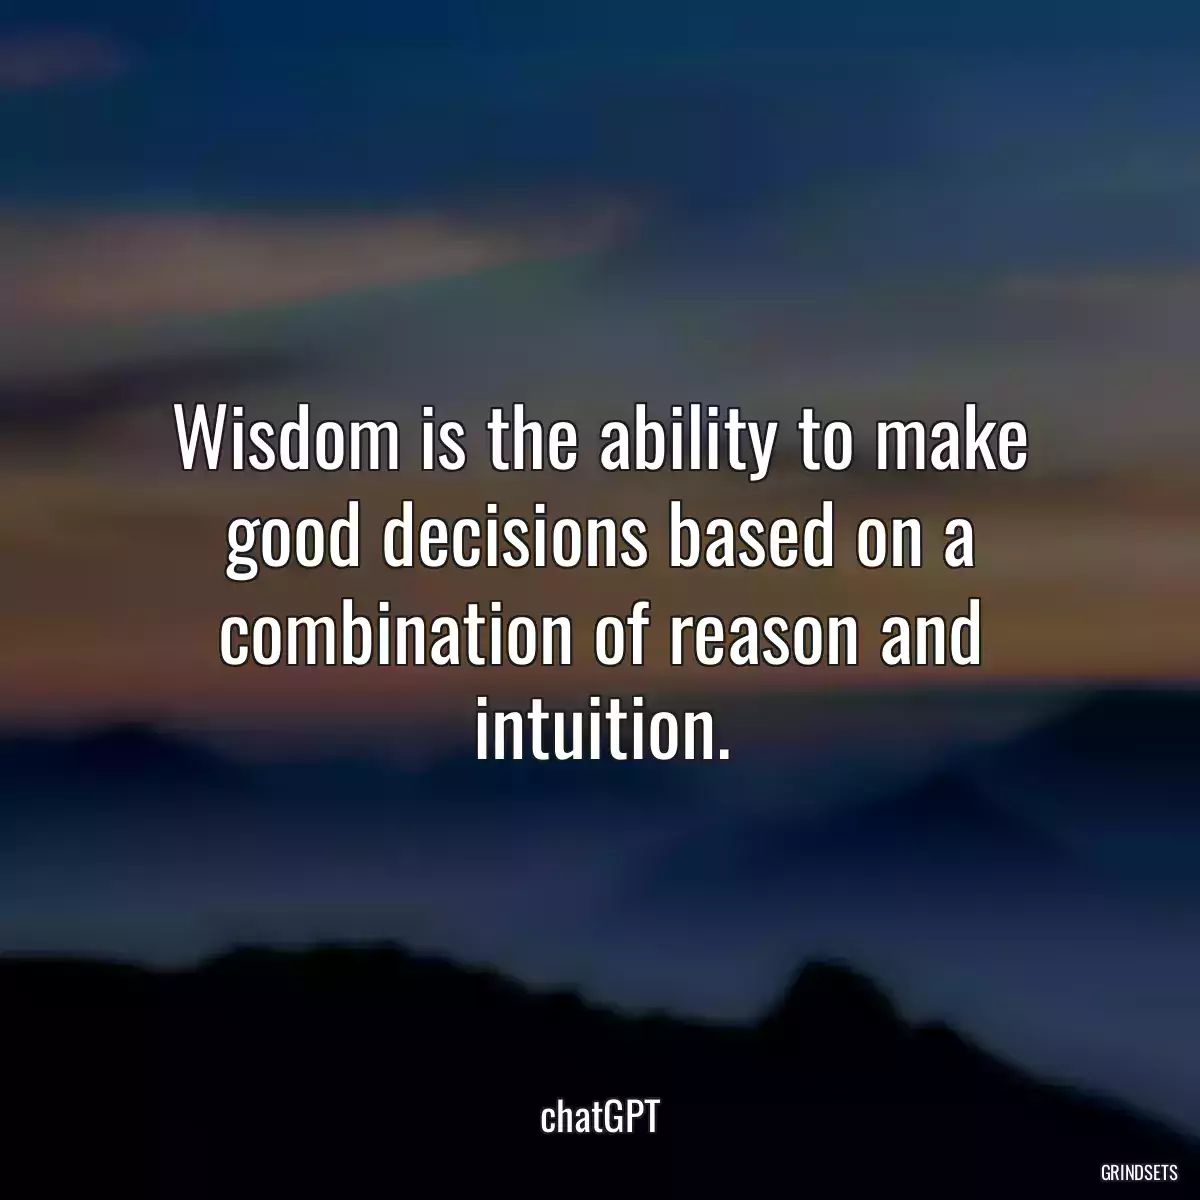 Wisdom is the ability to make good decisions based on a combination of reason and intuition.